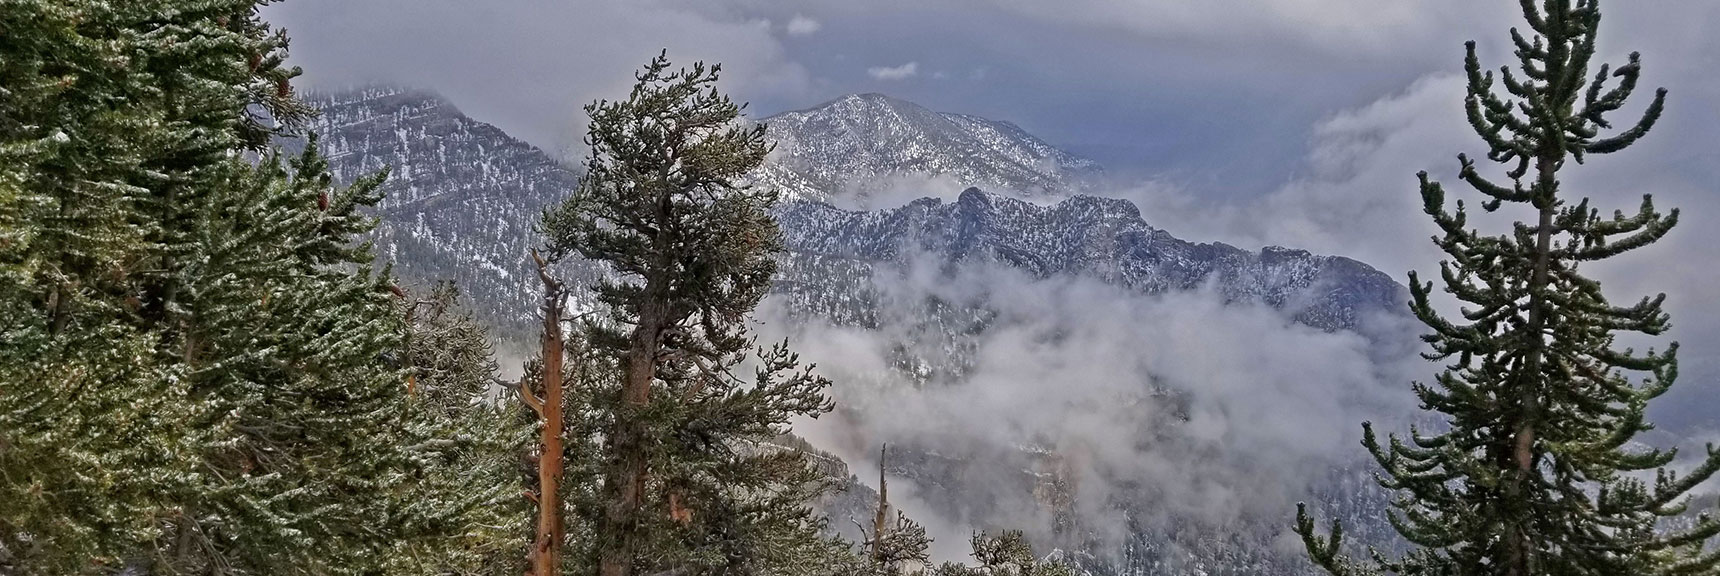 Clouds Passing Through the Kyle Canyon Scenery - Hide, Then Reveal Views | Charleston Peak Loop October Snow Dusting | Mt. Charleston Wilderness | Spring Mountains, Nevada